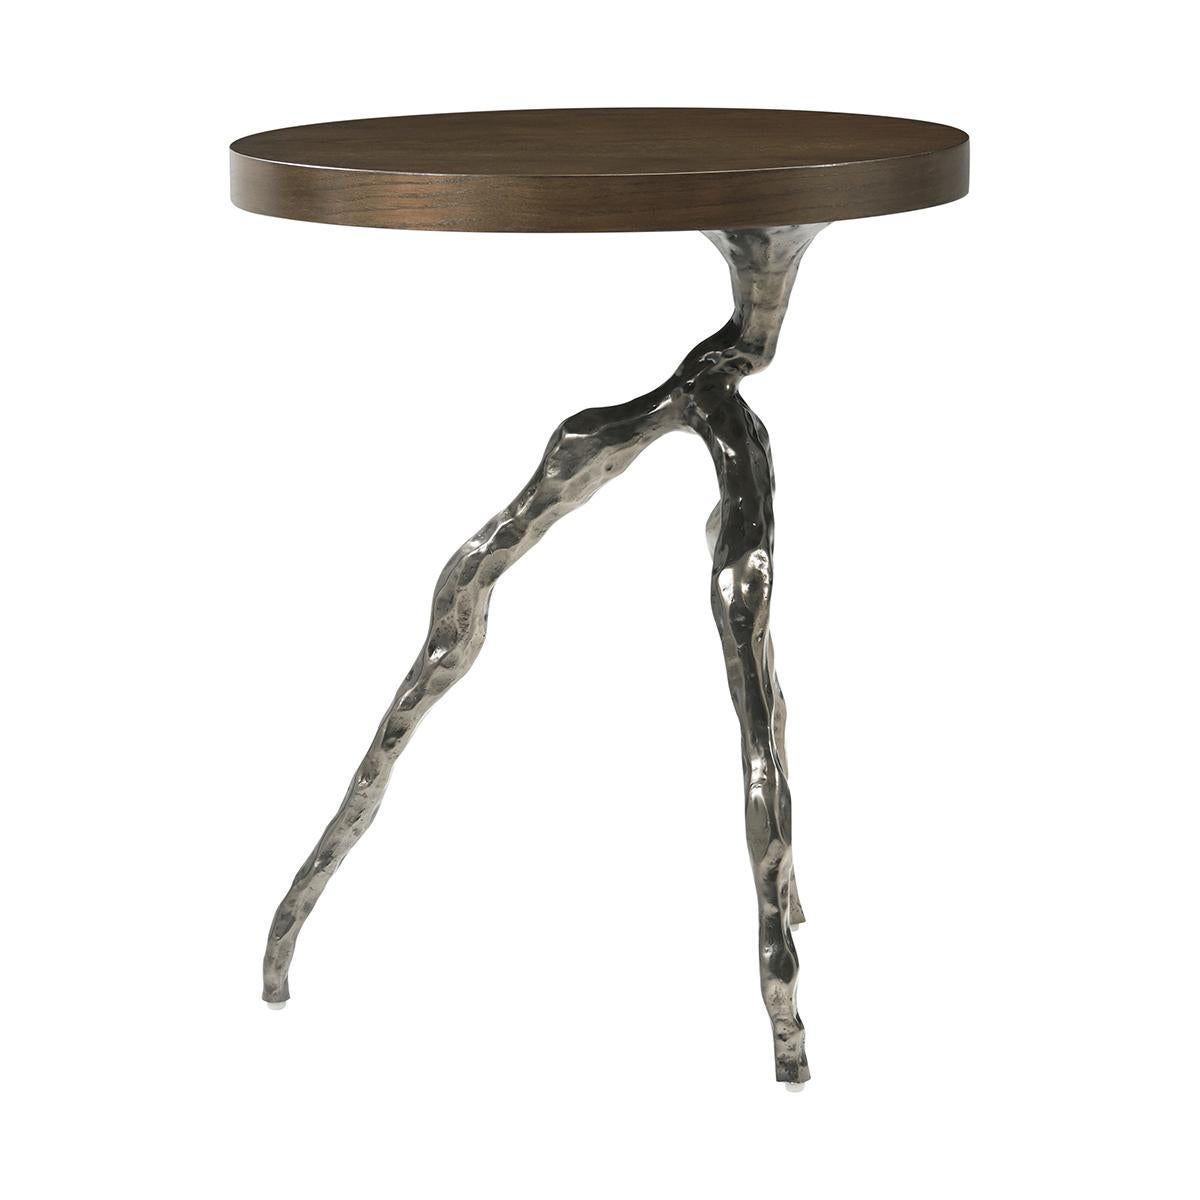 Vietnamese Modern Faux Bois Accent Table - Earth Finish For Sale